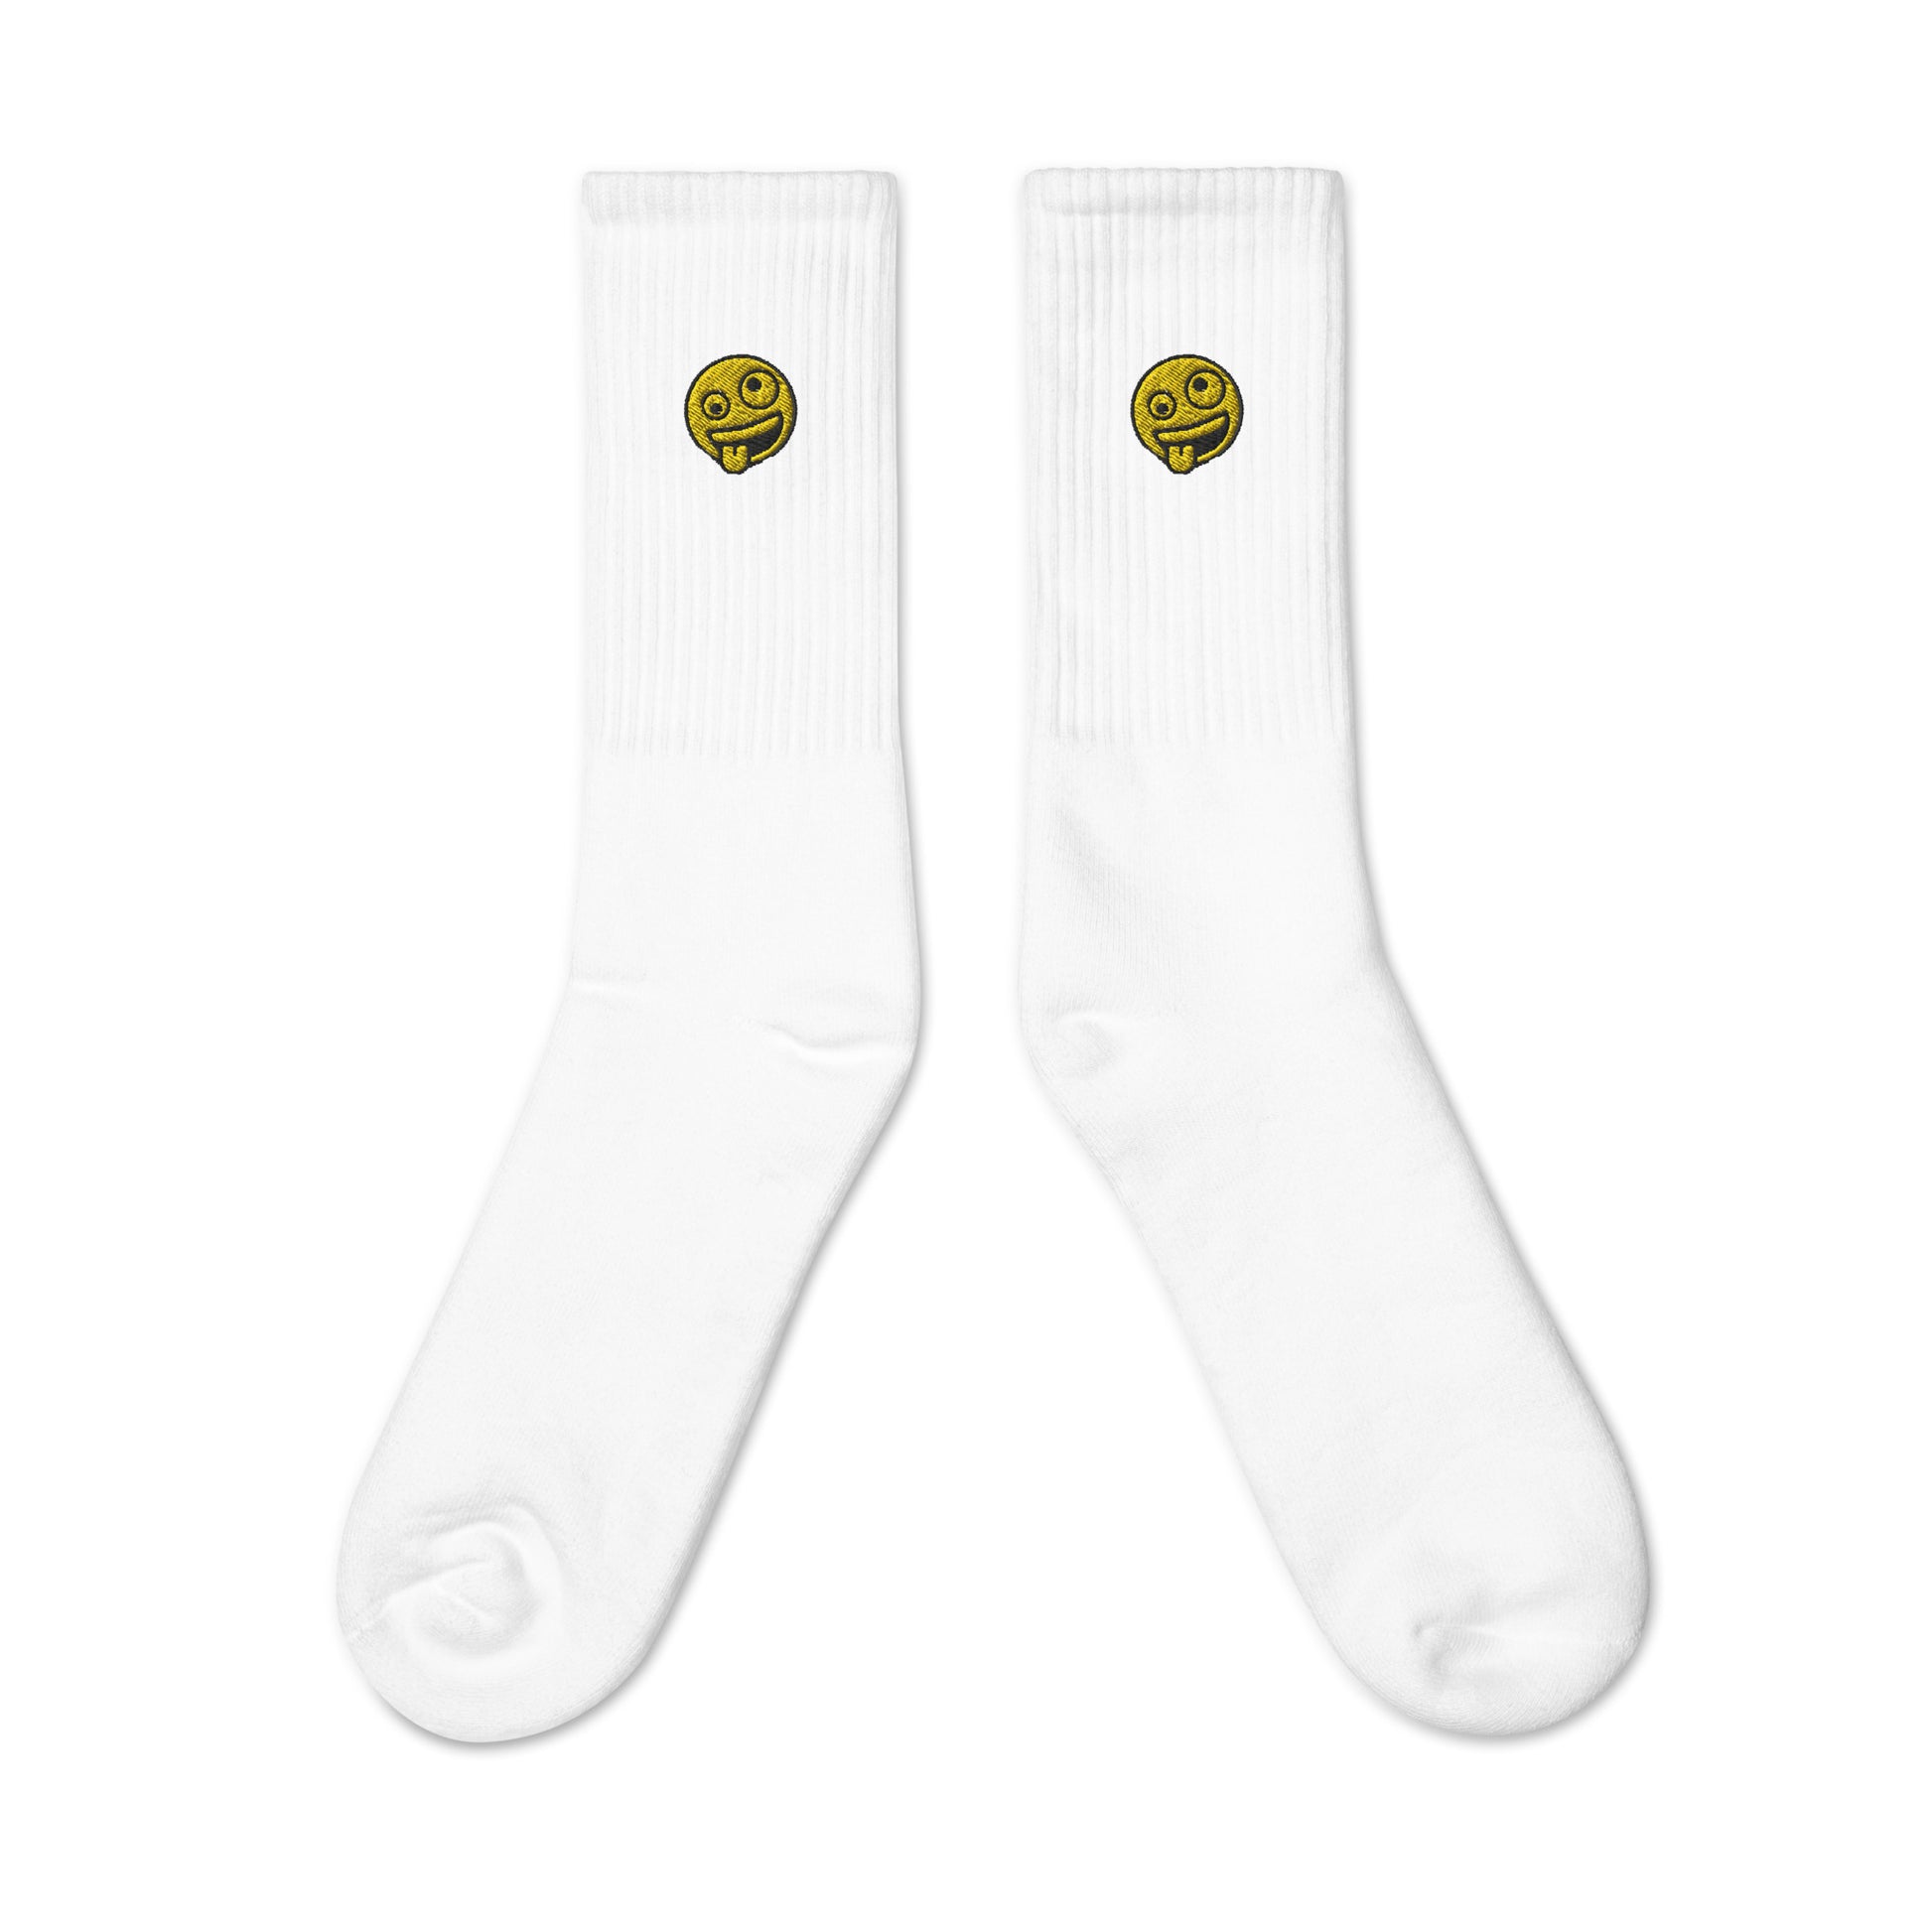 socks-from-the-front-with-emoji-symbol